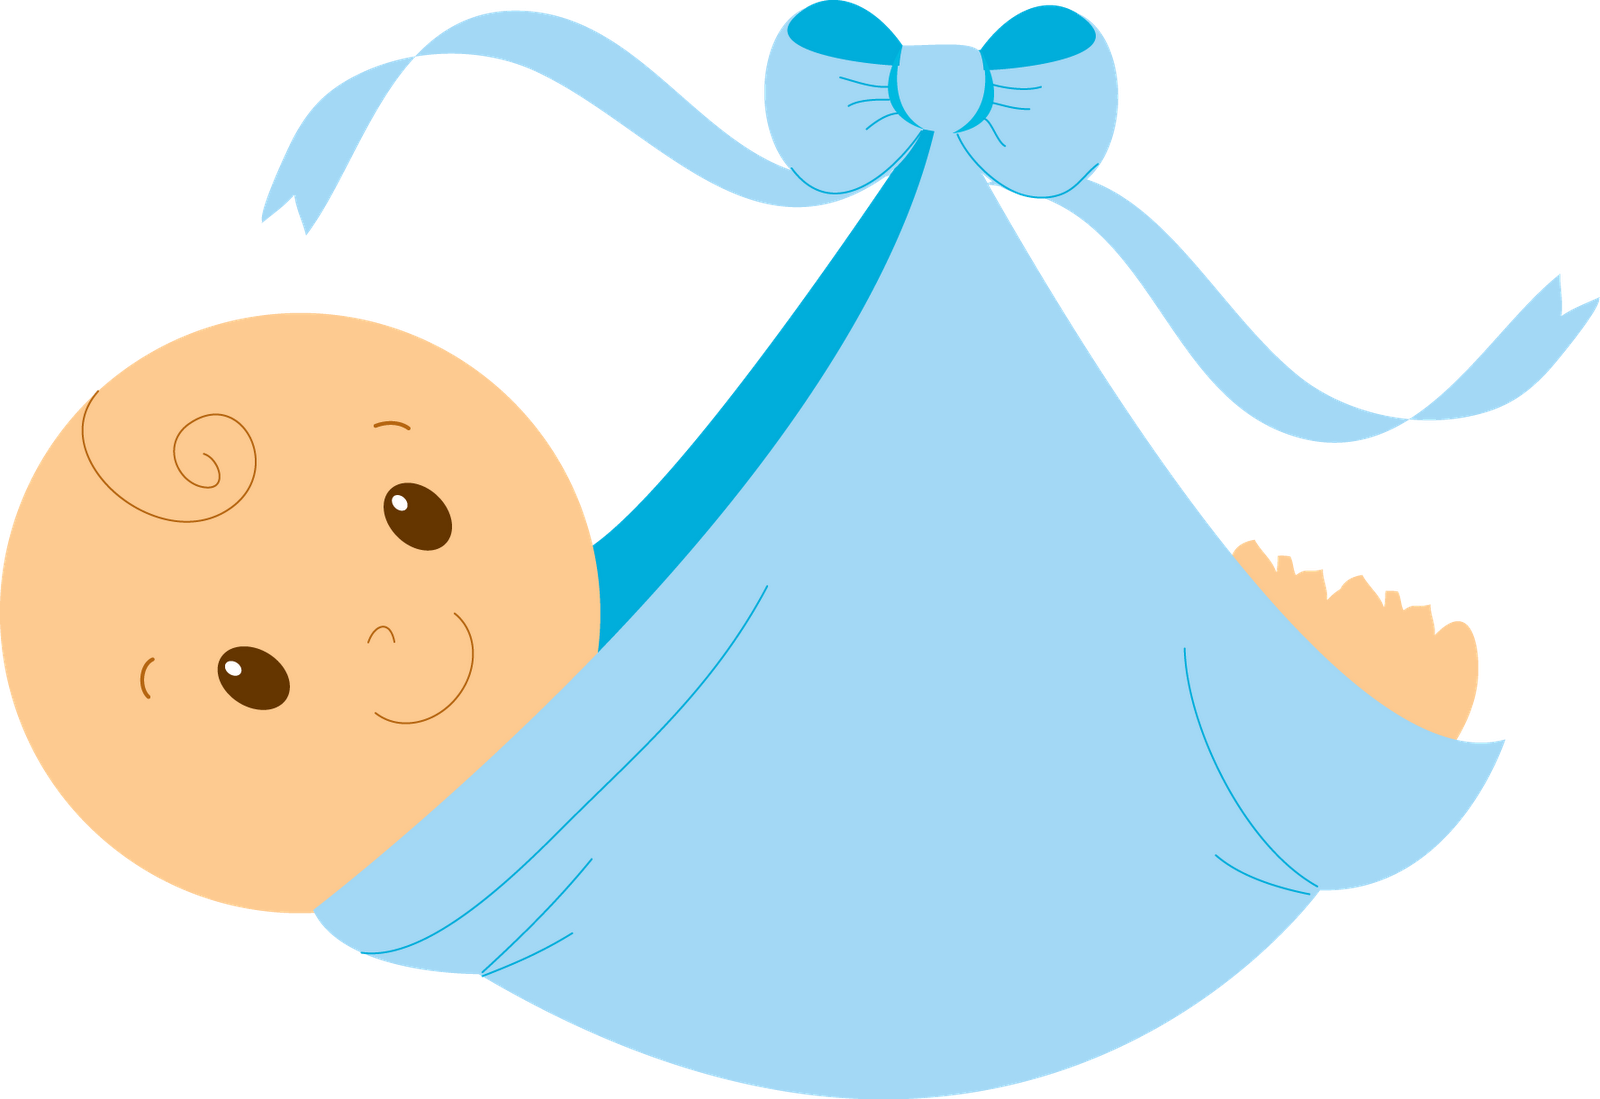 Free Baby Shower Clip Art at 